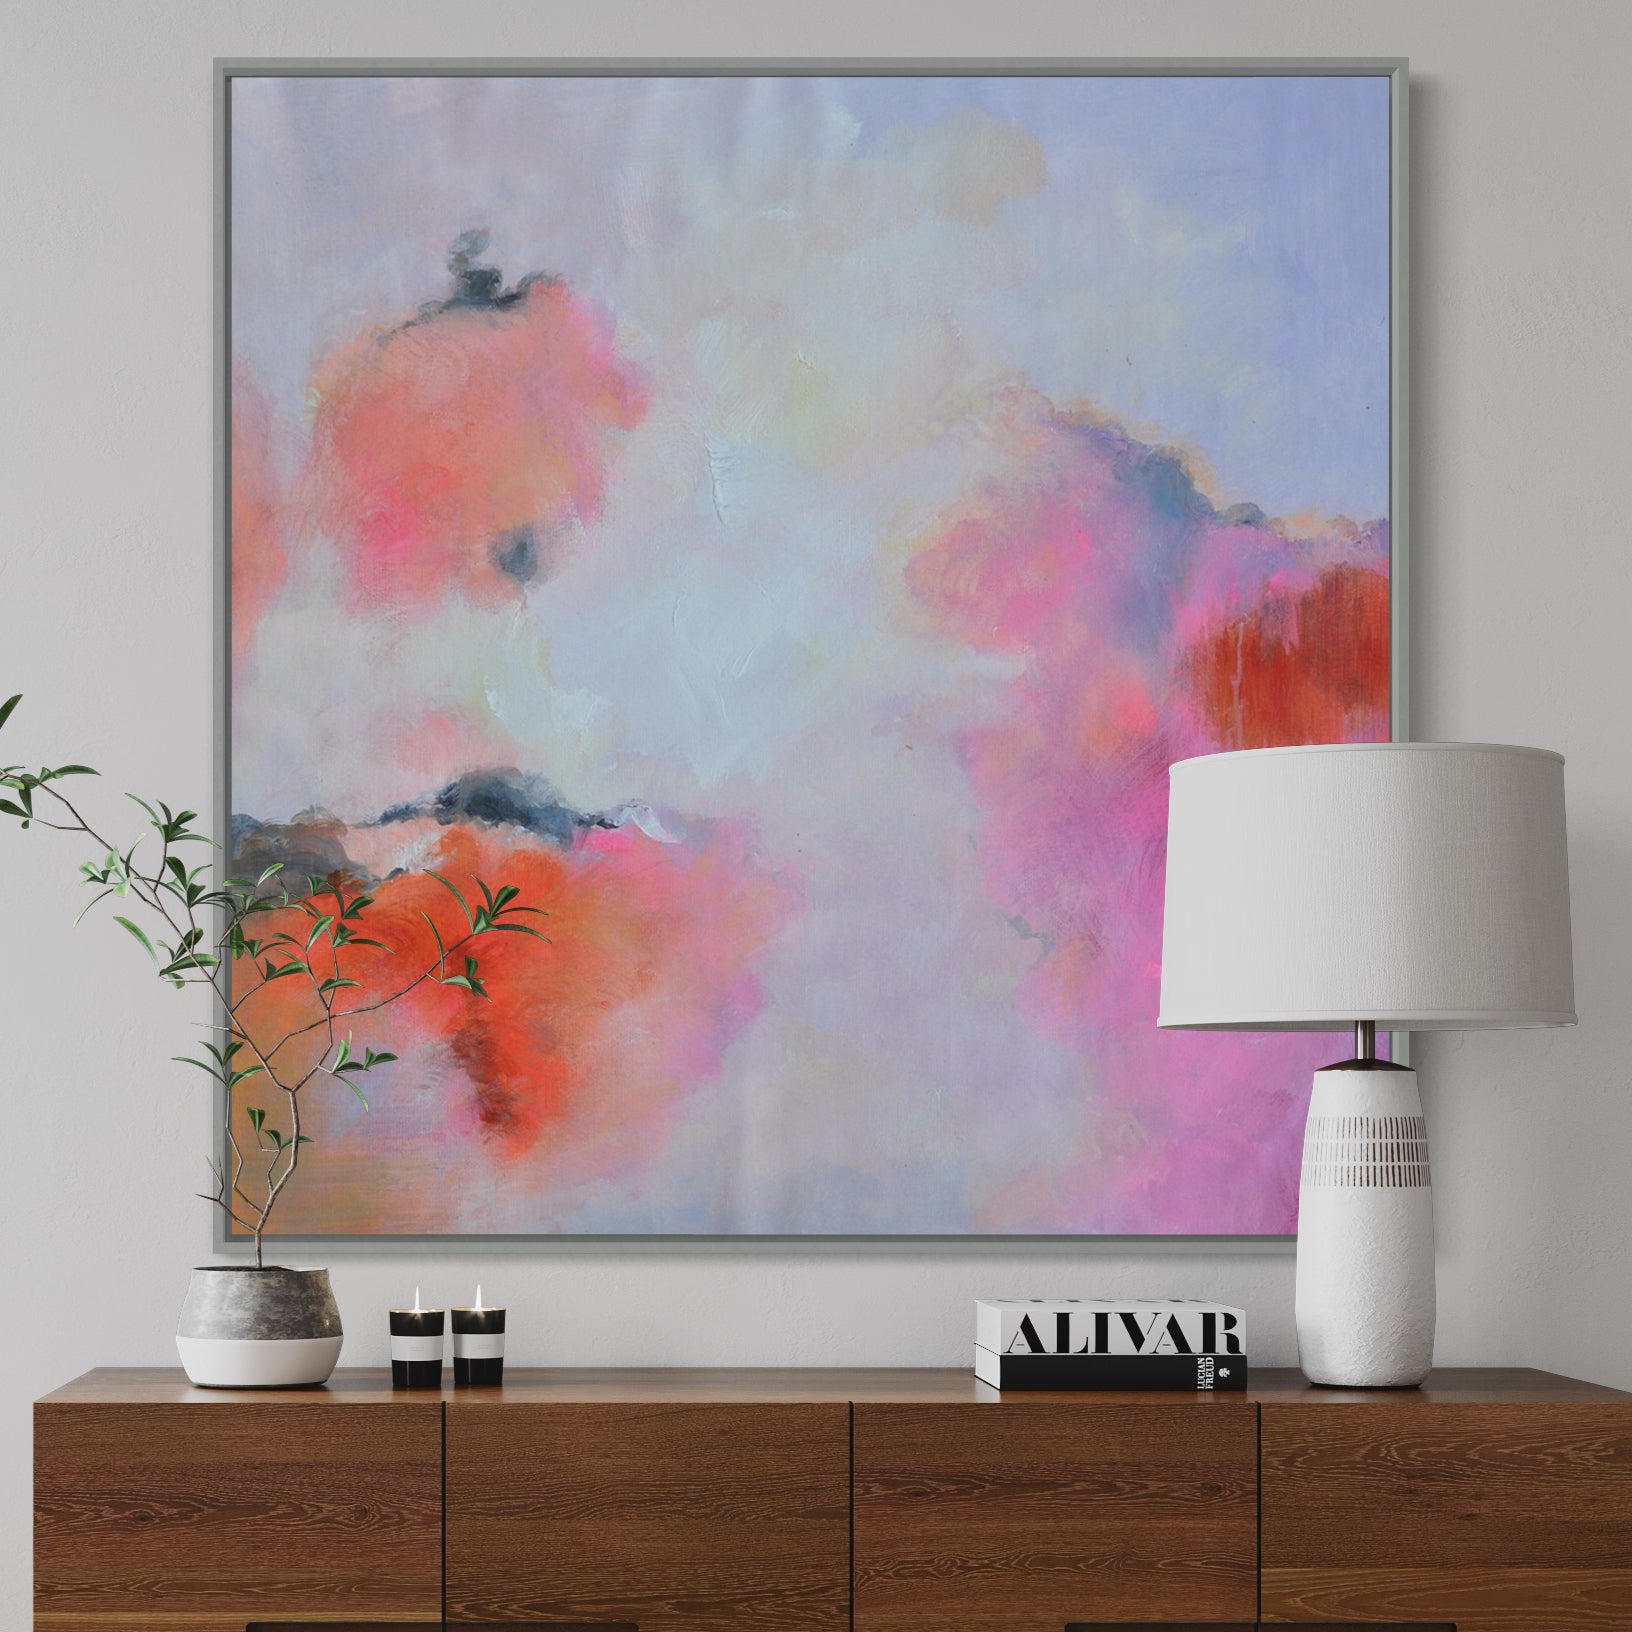 Cotton Candy, Black And Silver / 120x120cm